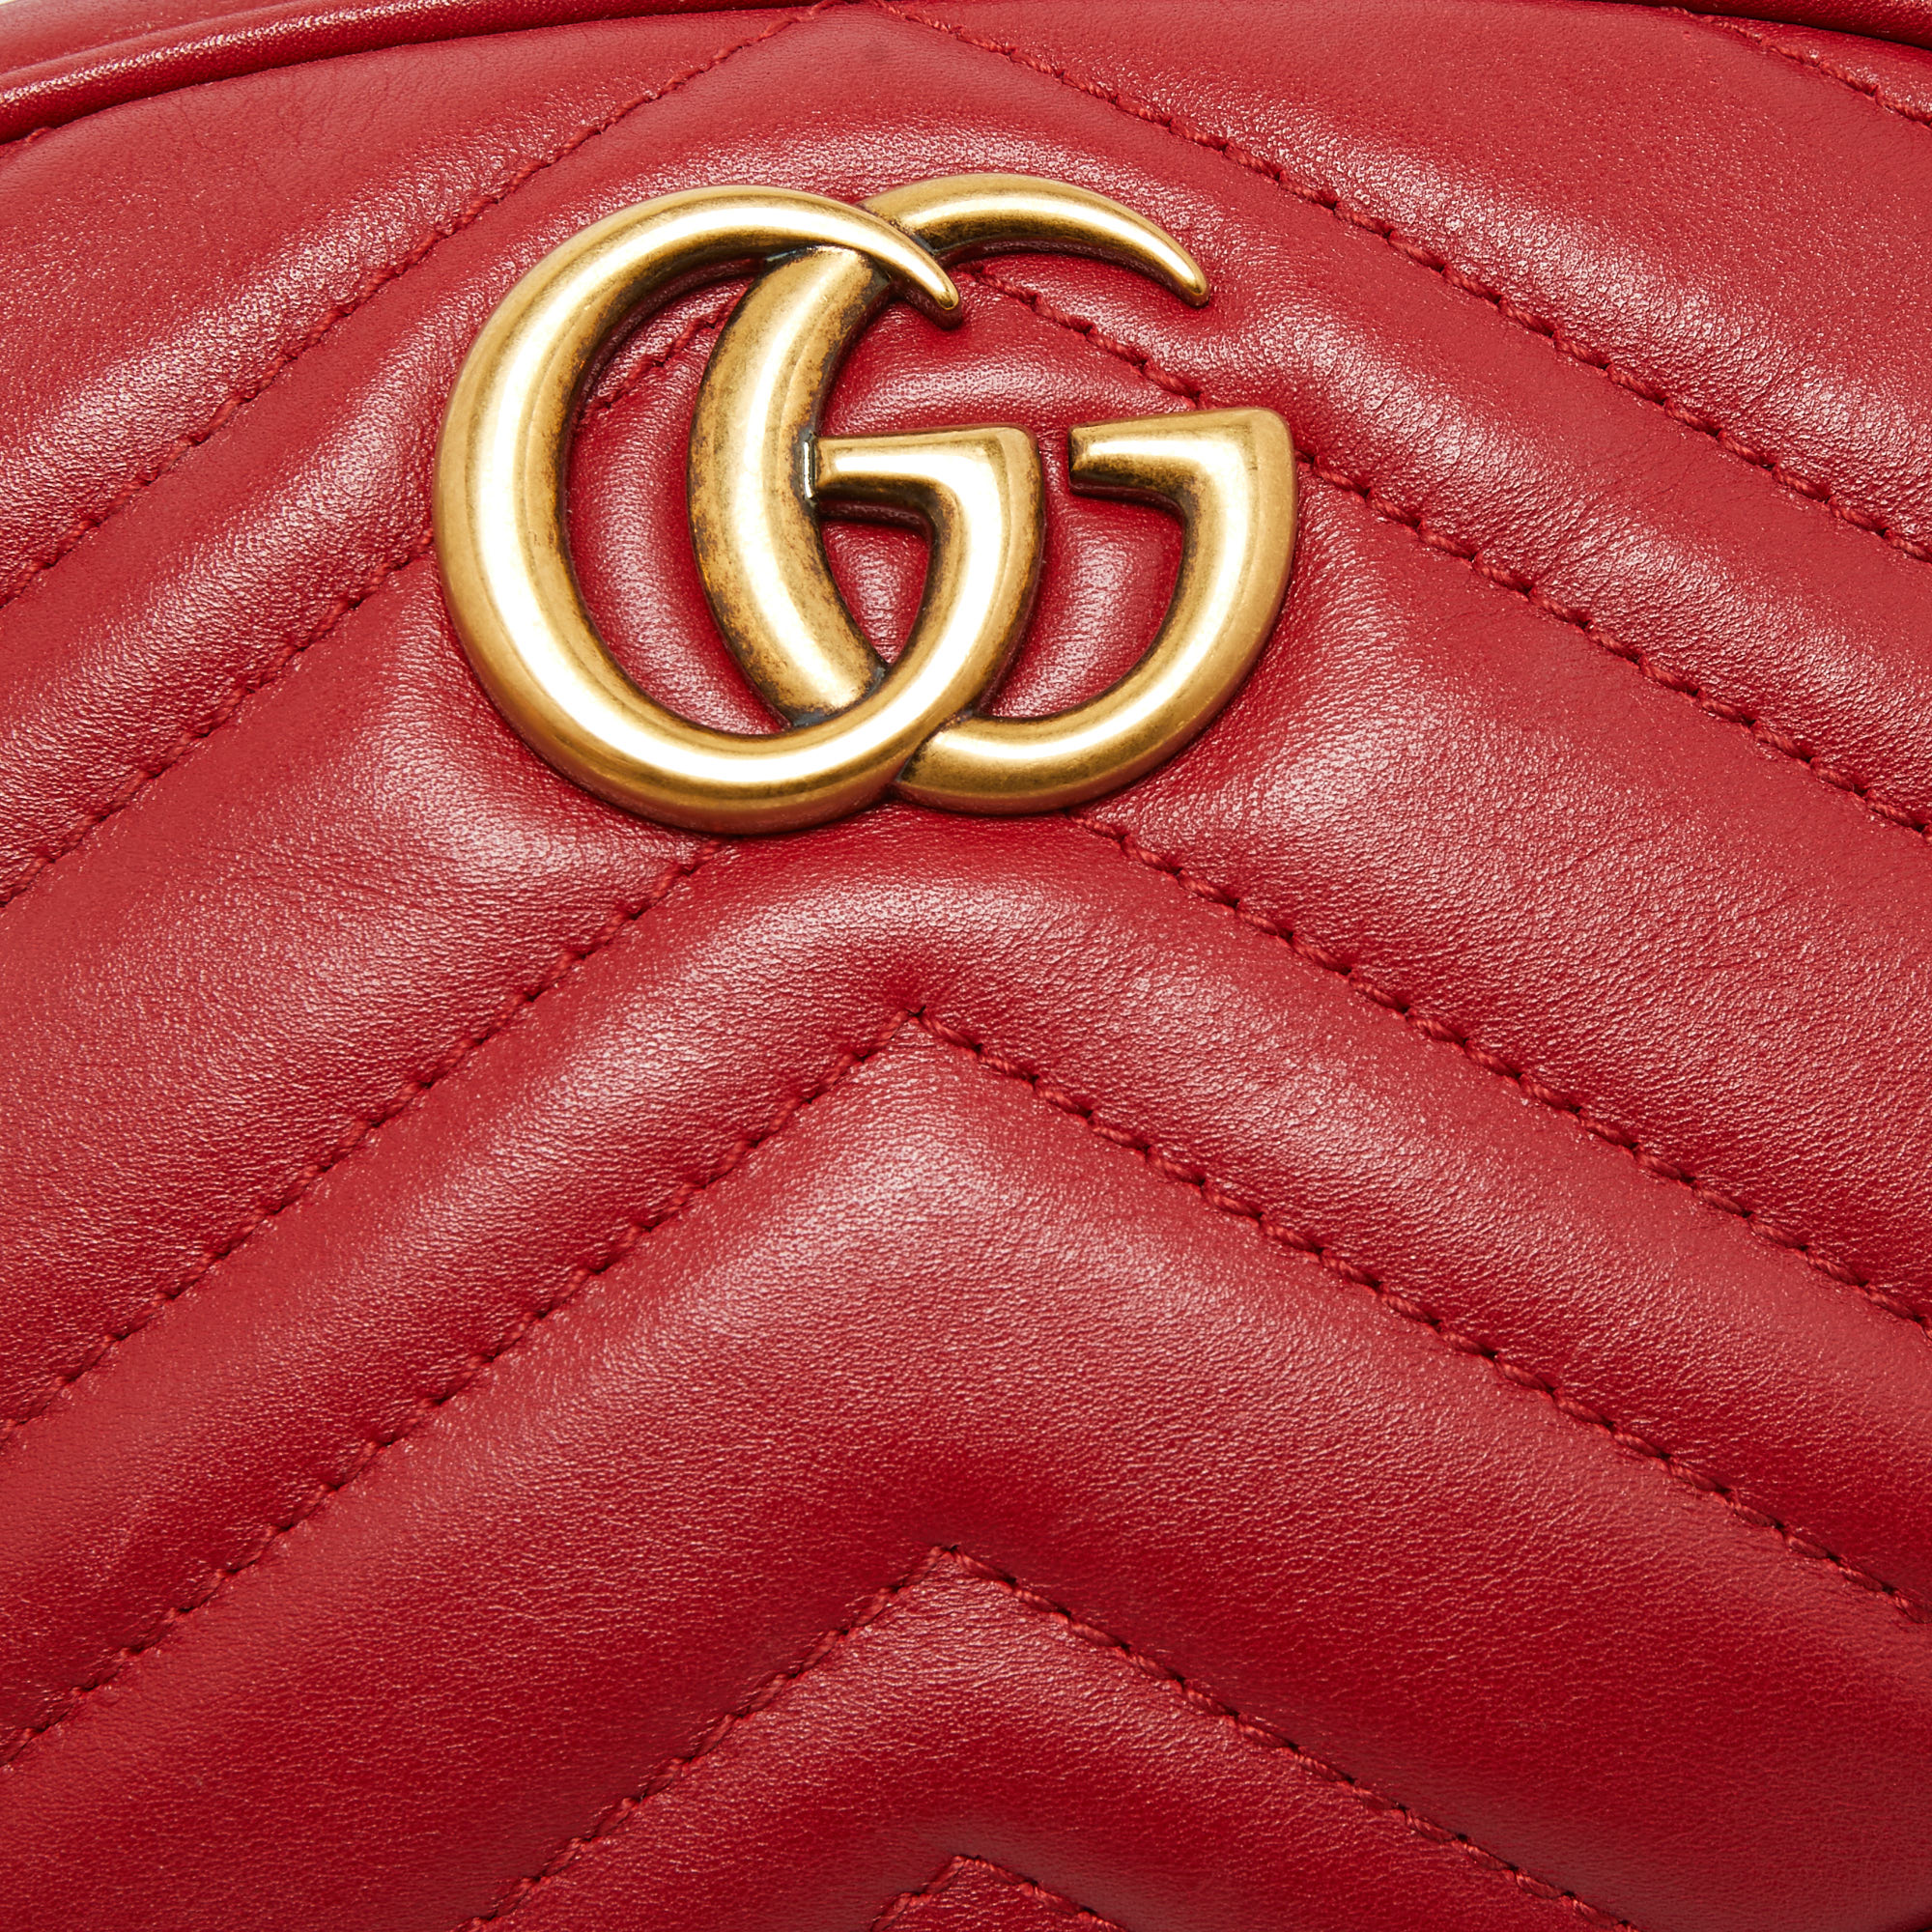 Gucci Red Matelasse Leather GG Marmont Belt Bag